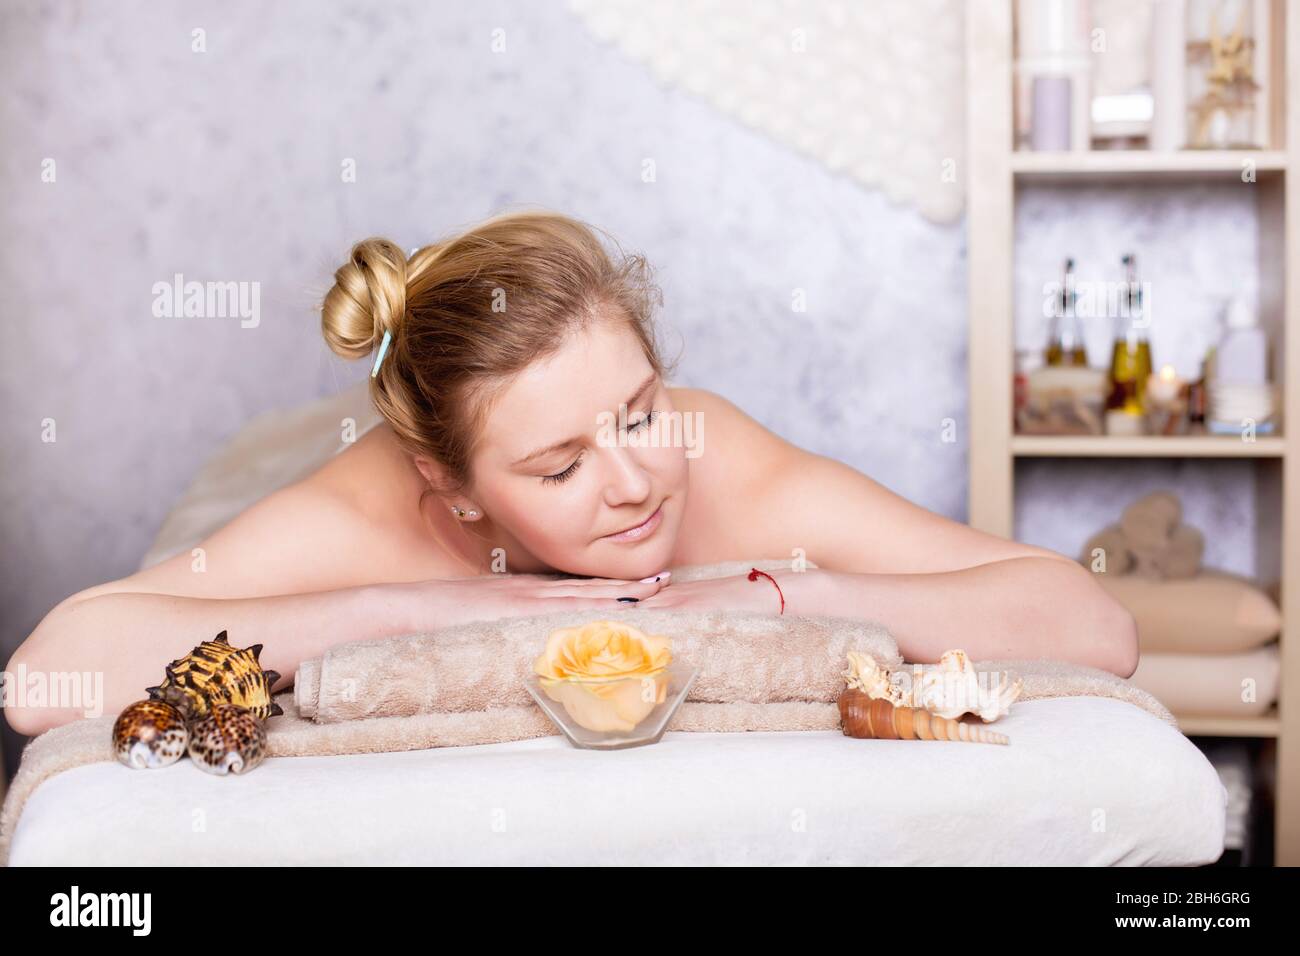 healthy and beautiful blond woman in spa salon. Traditional oriental aroma therapy and beauty treatments. Stock Photo